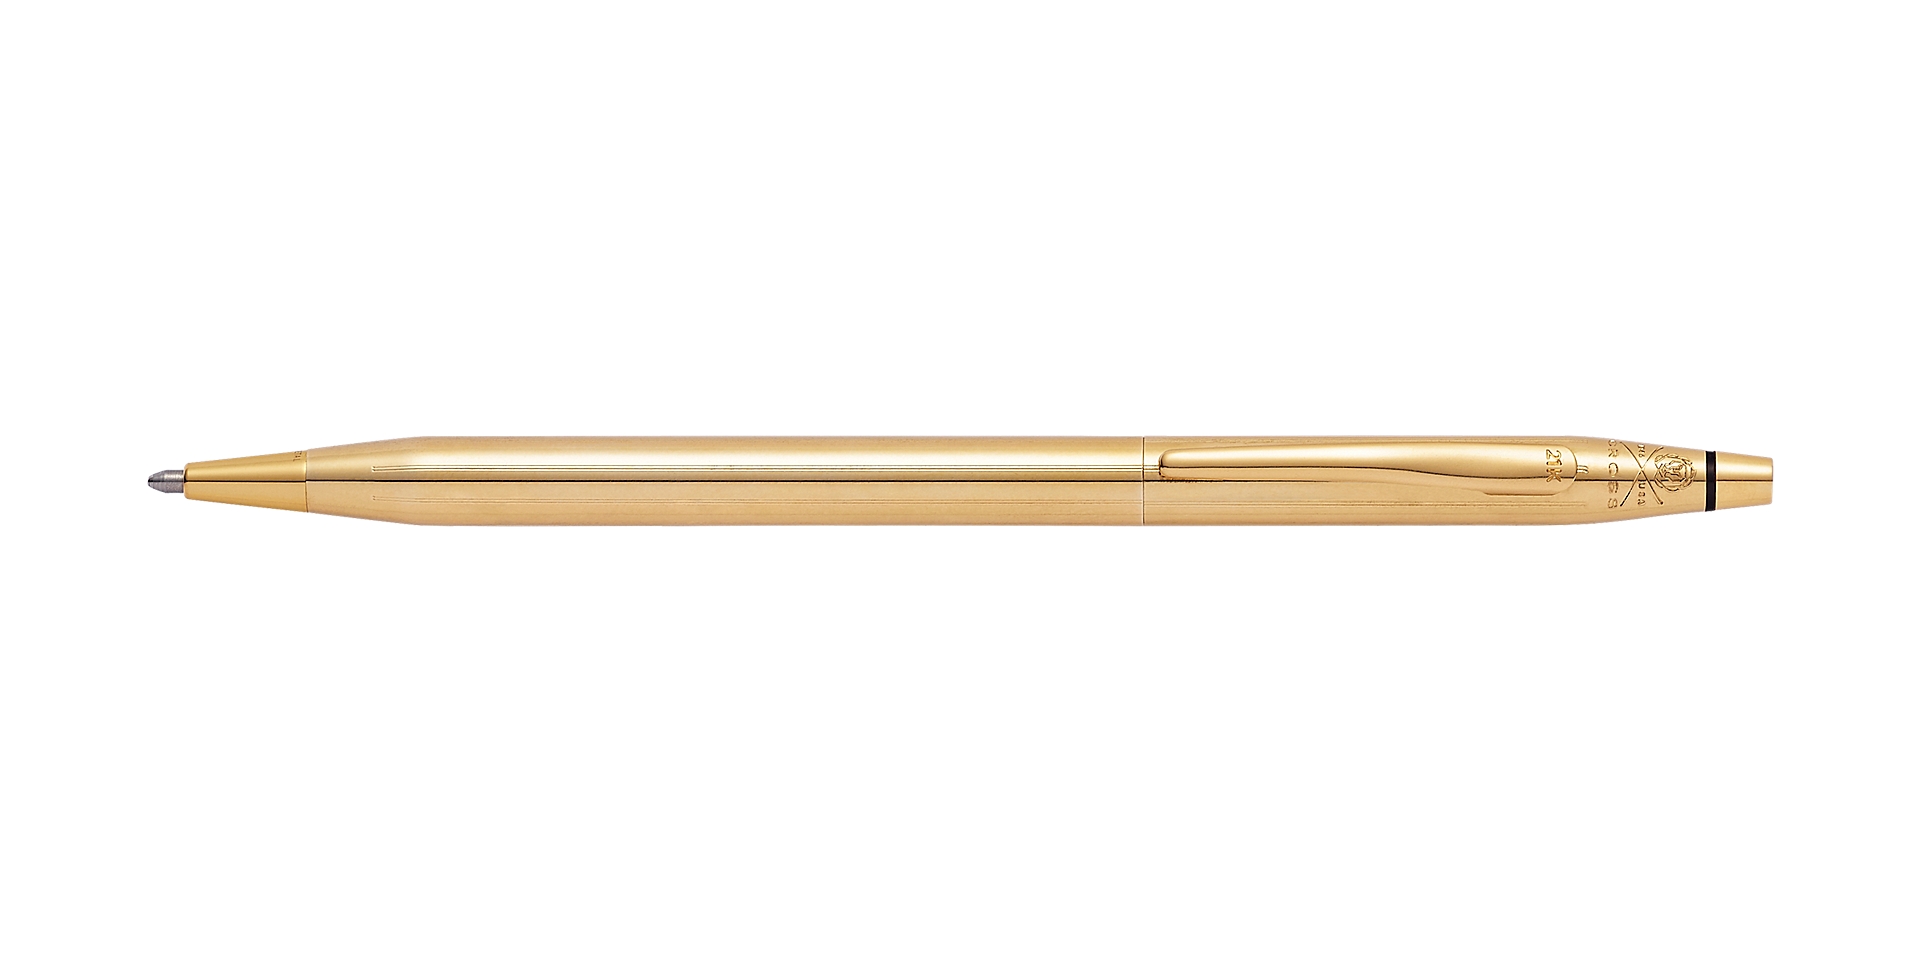 Stockists of 21st Century Limited-Edition 21K Solid-Gold Ballpoint Pen